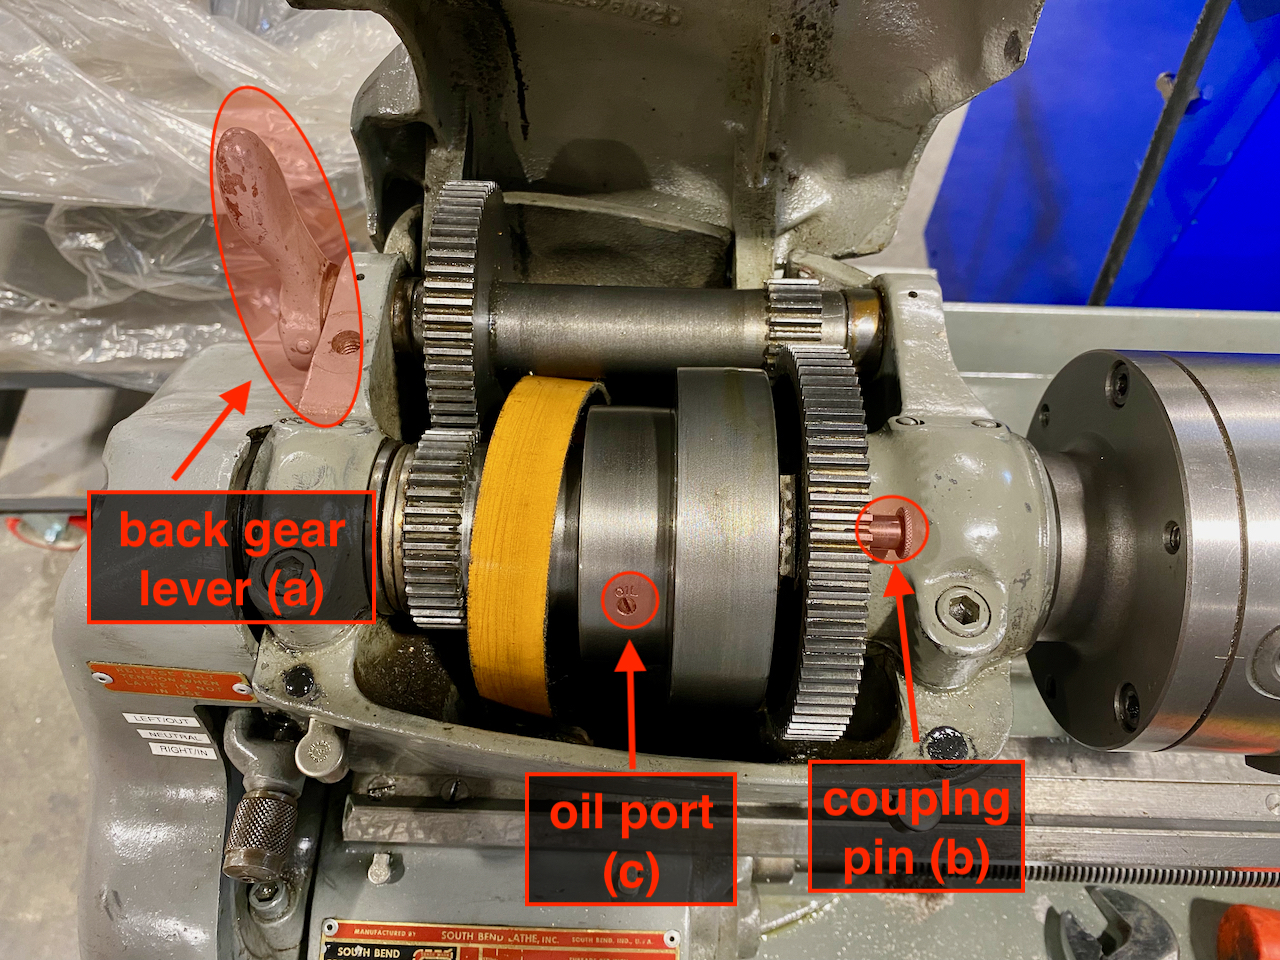 Overview of the South Bend headstock spindle controls